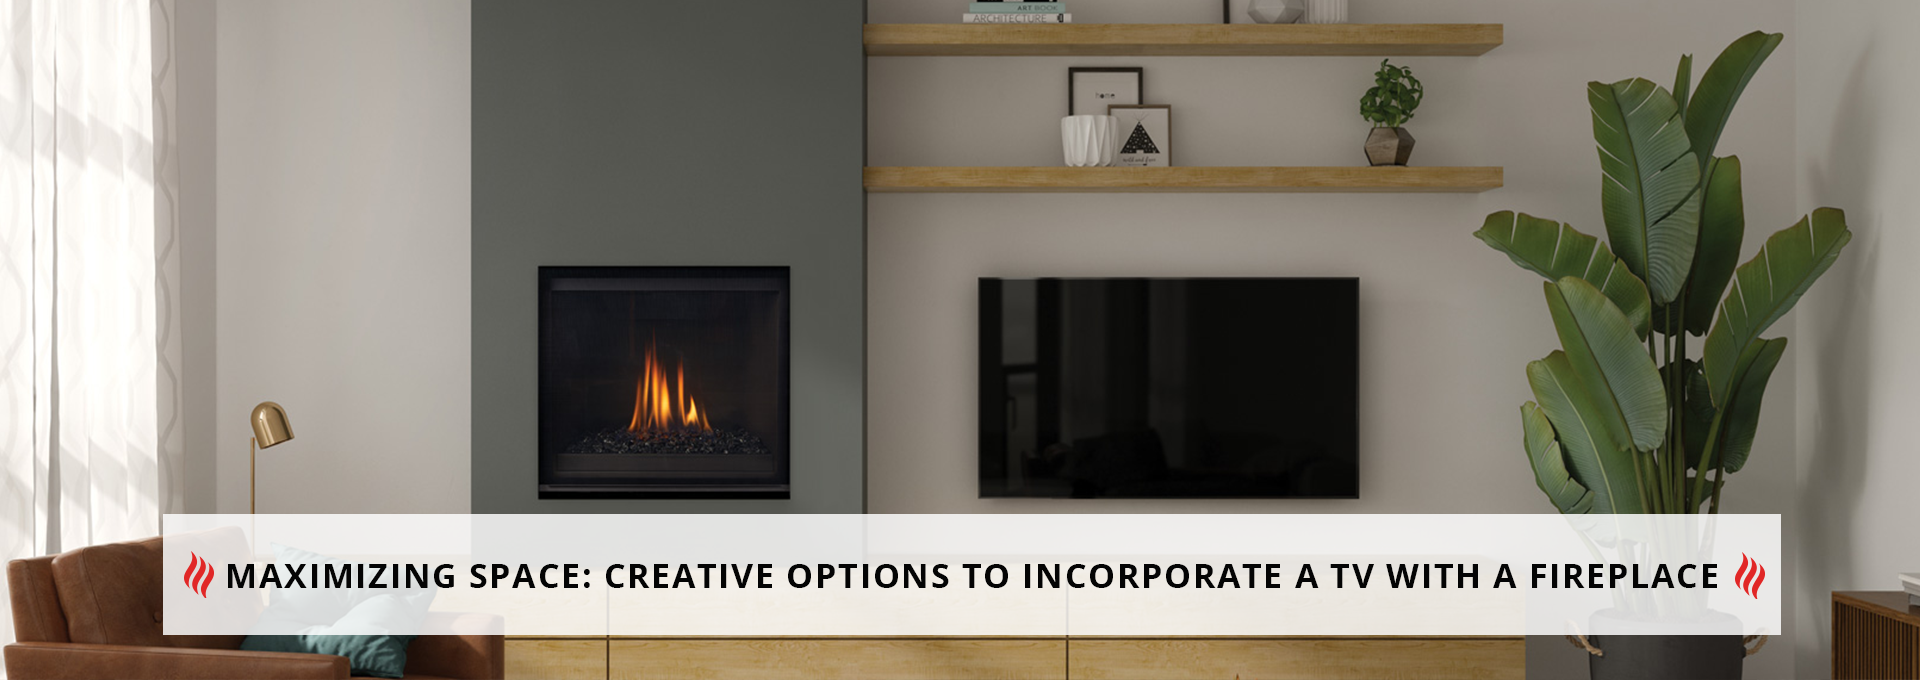 Maximizing Space: Creative Options to Incorporate a TV with a Fireplace 